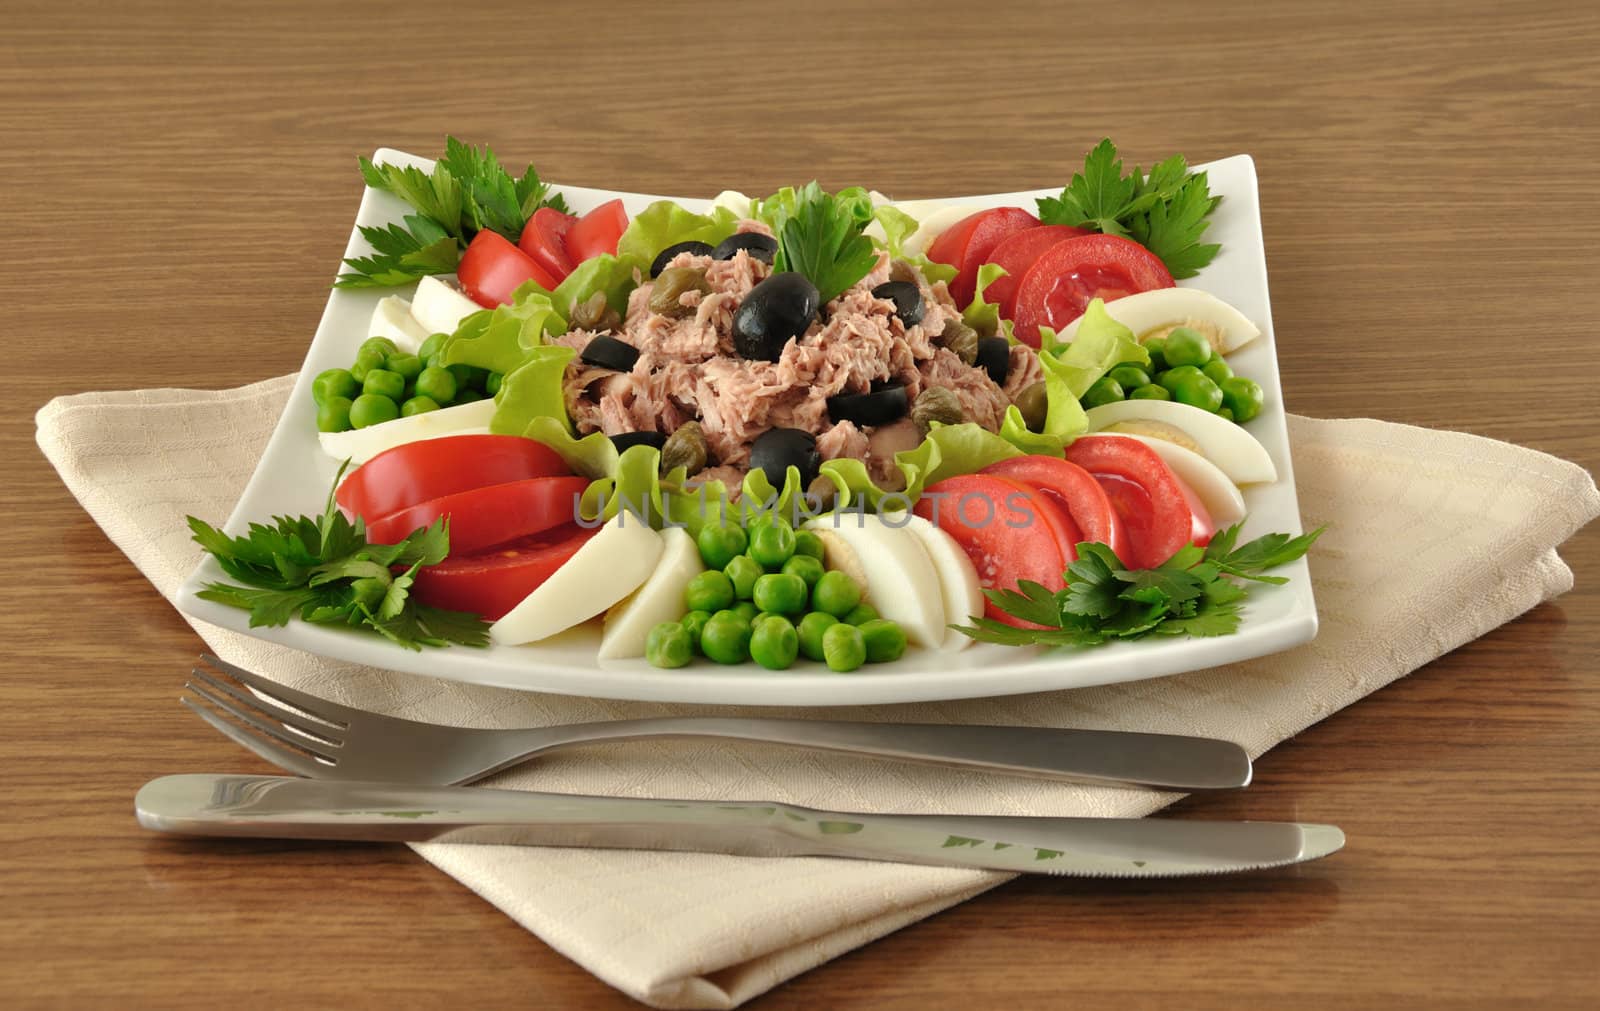 Tuna with olives and capers and surrounded by diced vegetables